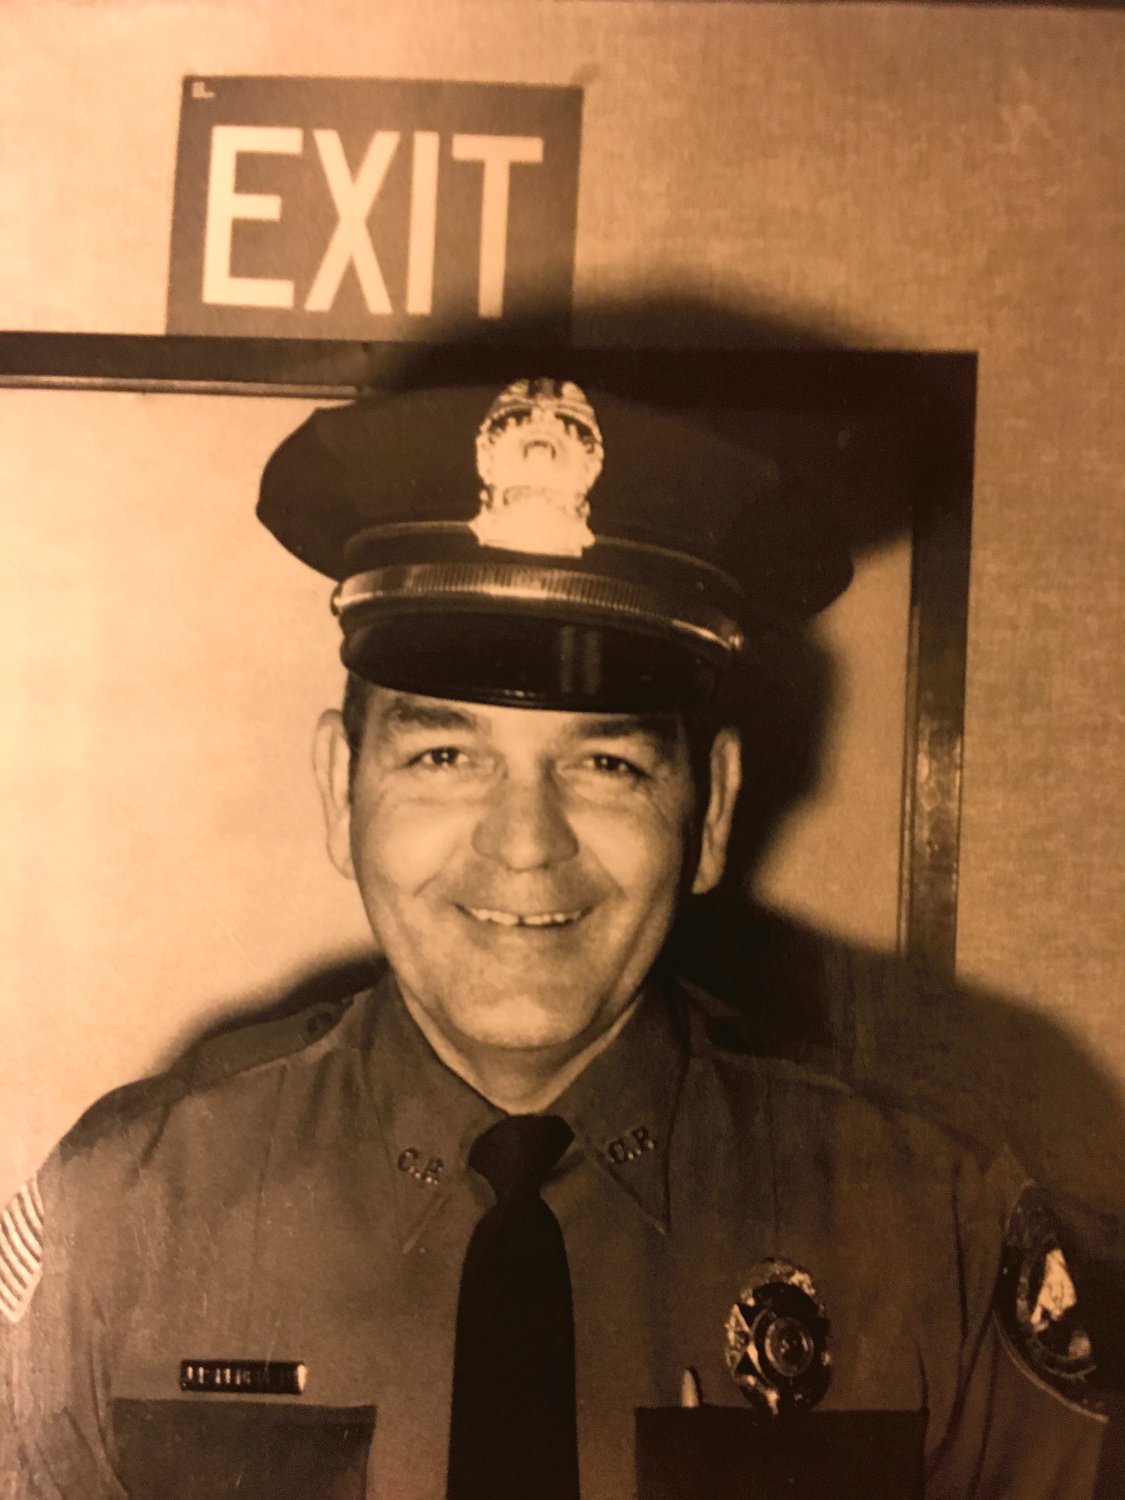 John Penberth worked as a Chehalis police officer and also volunteered as a Pe Ell firefighter, later serving as fire chief.